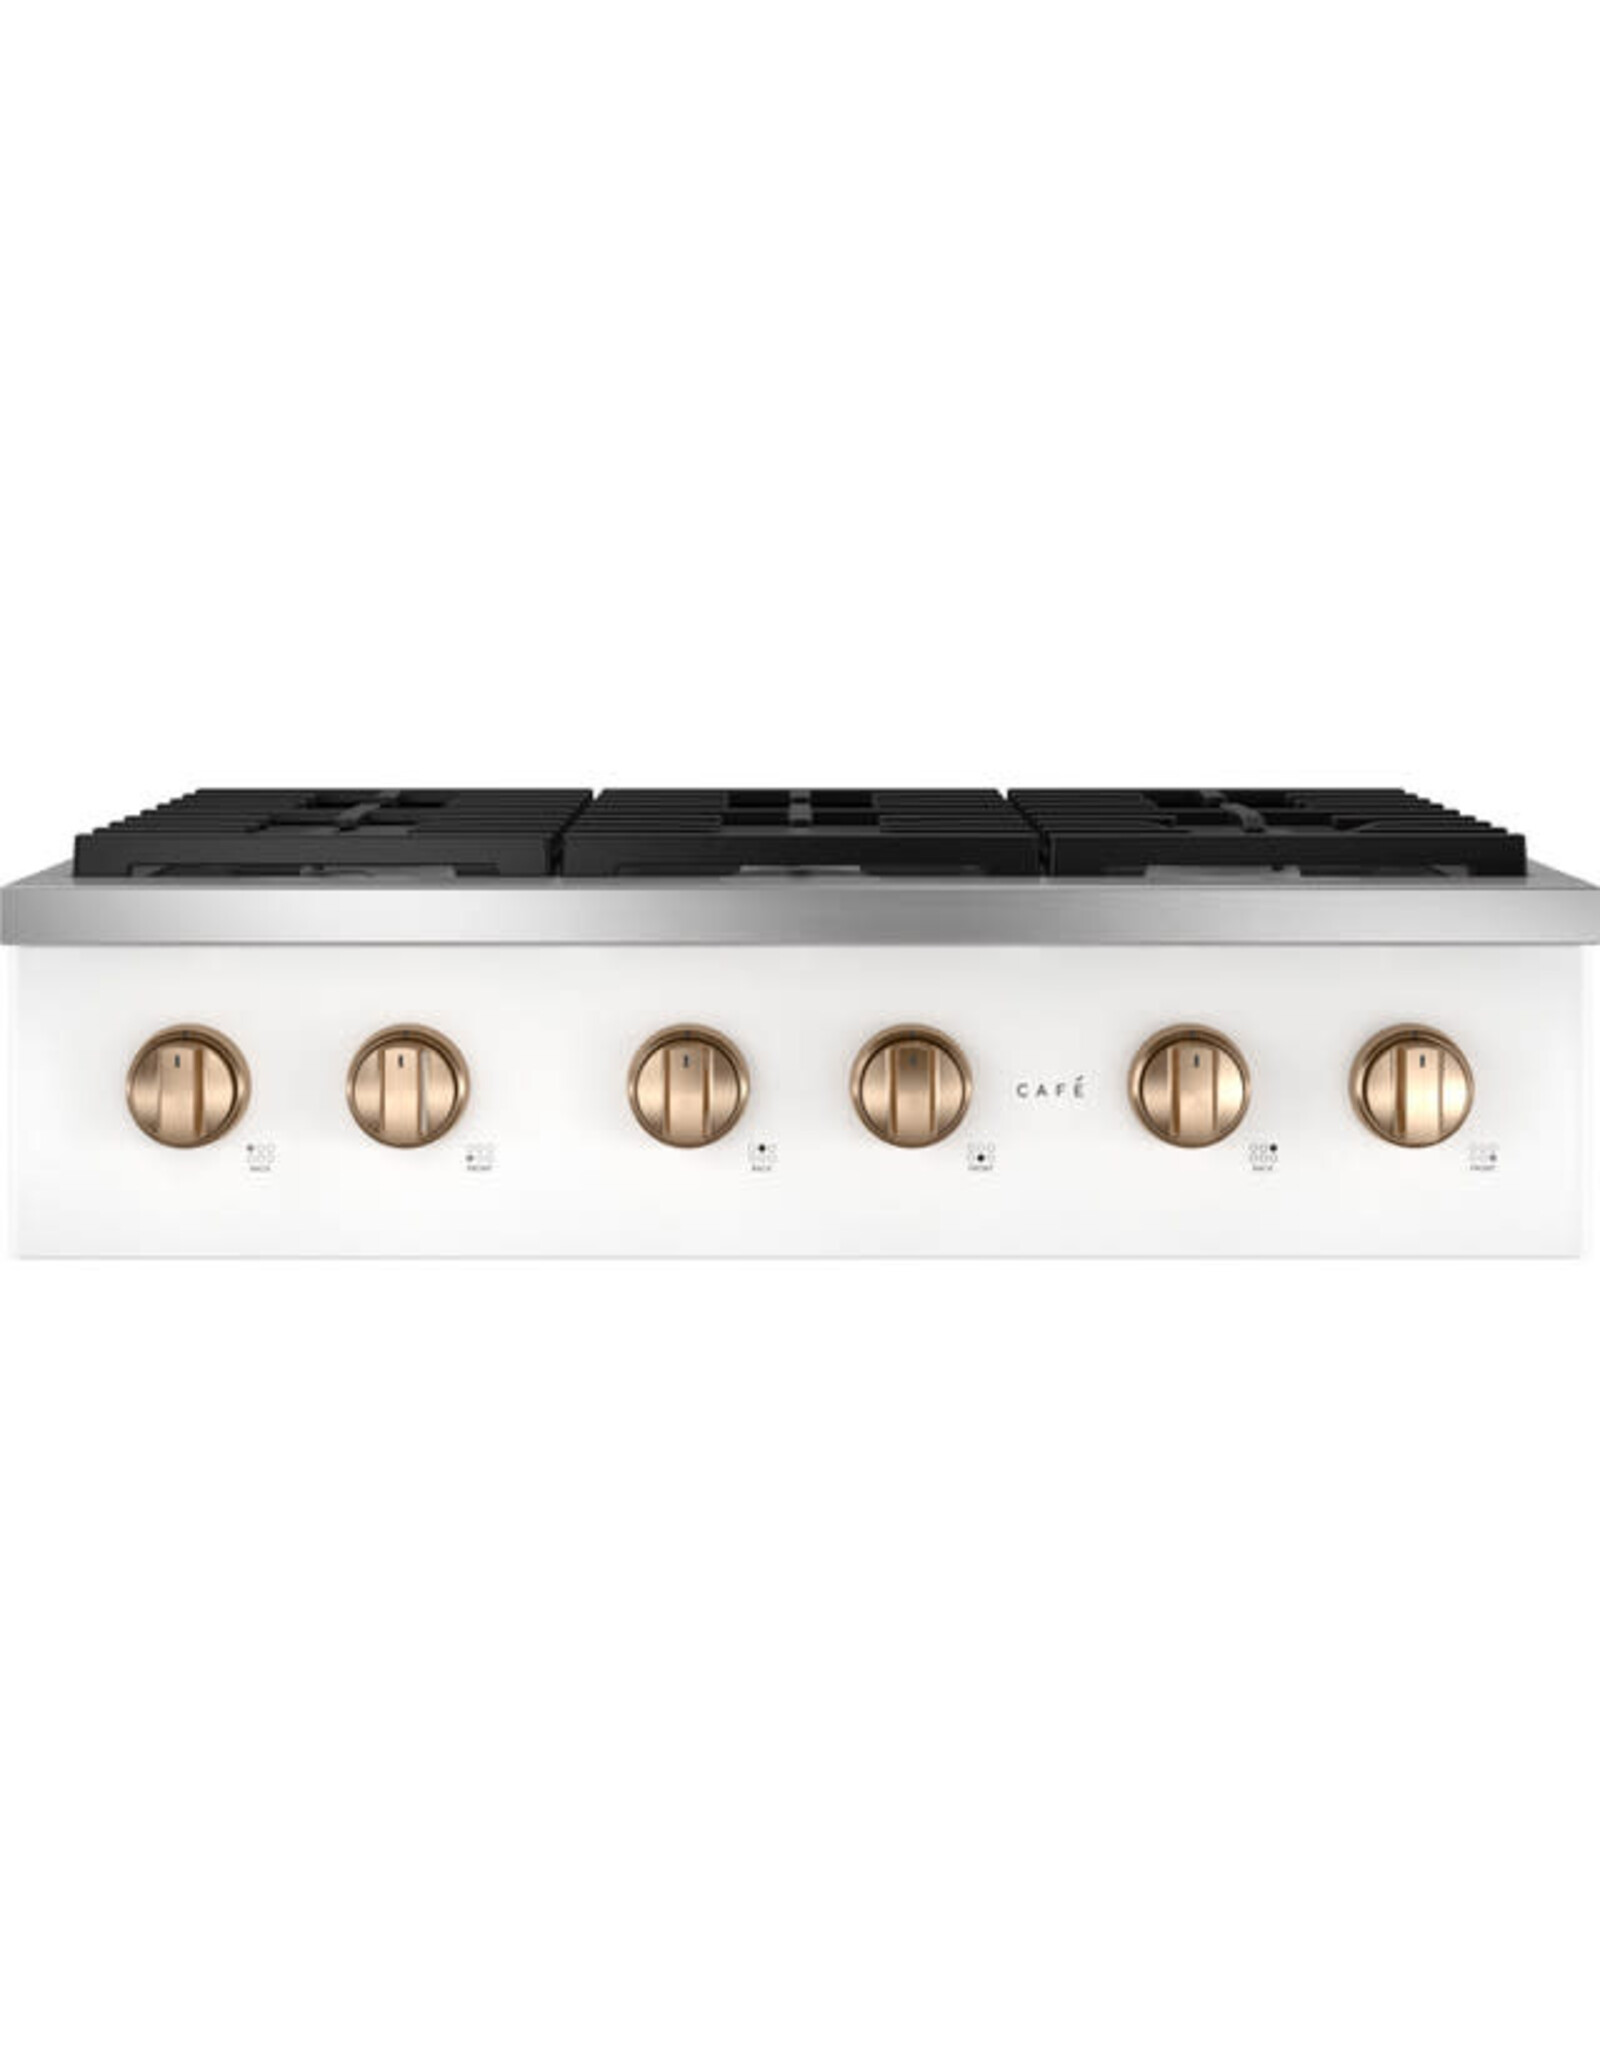 GE Cafe' CGU366P4TW2 Cafe 36 in. Gas Cooktop in Matte White with 6 Burners